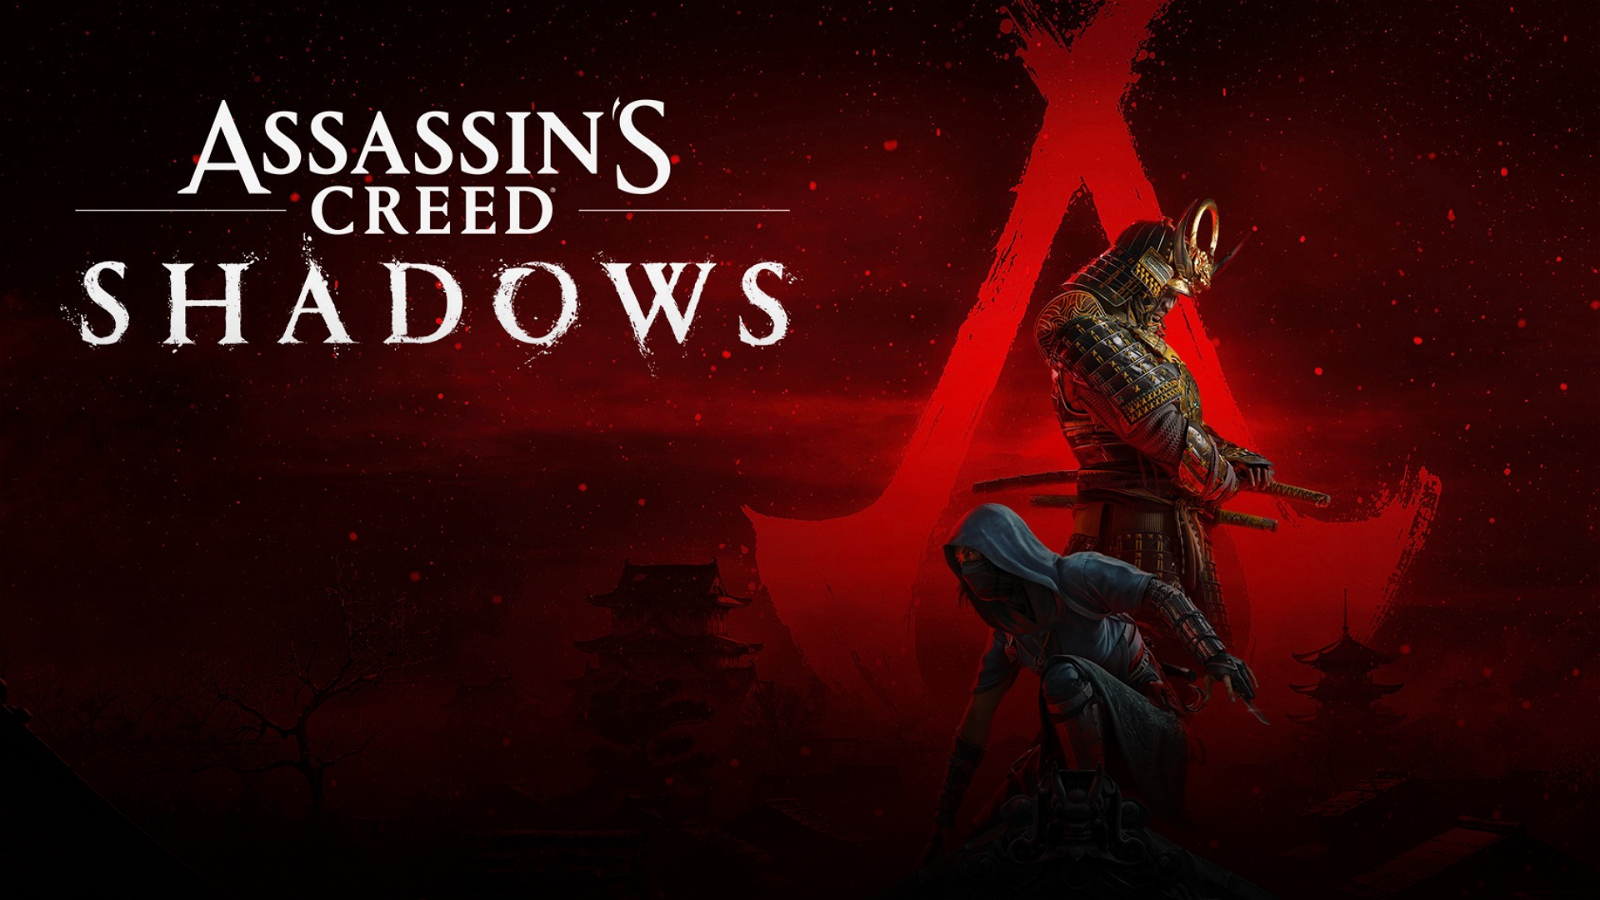 Assassin’s Creed Shadows’ Epic Trailer Takes the Action to Japan With 2 New Protagonists and an Official Release Date